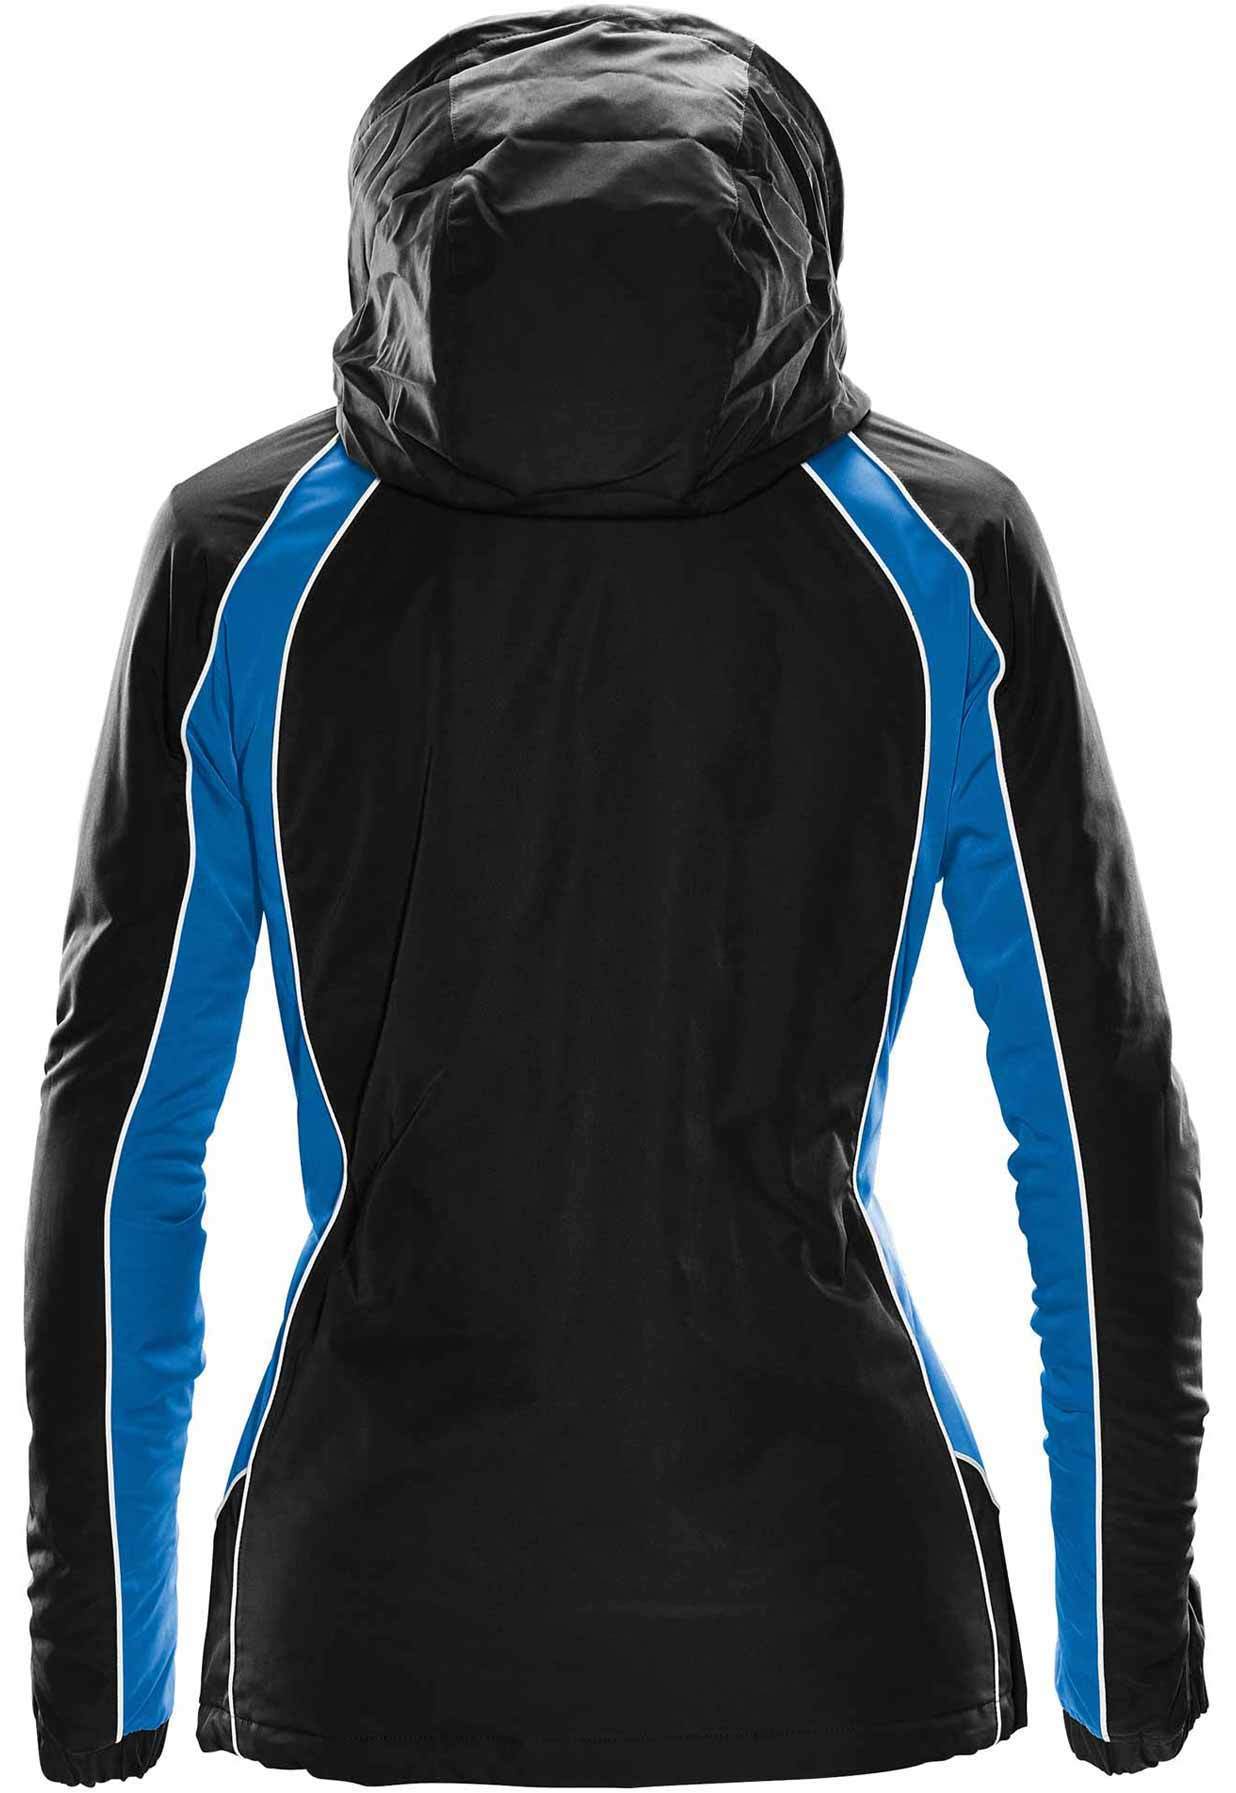 RWX-1W Road warrior thermal shell pour femme